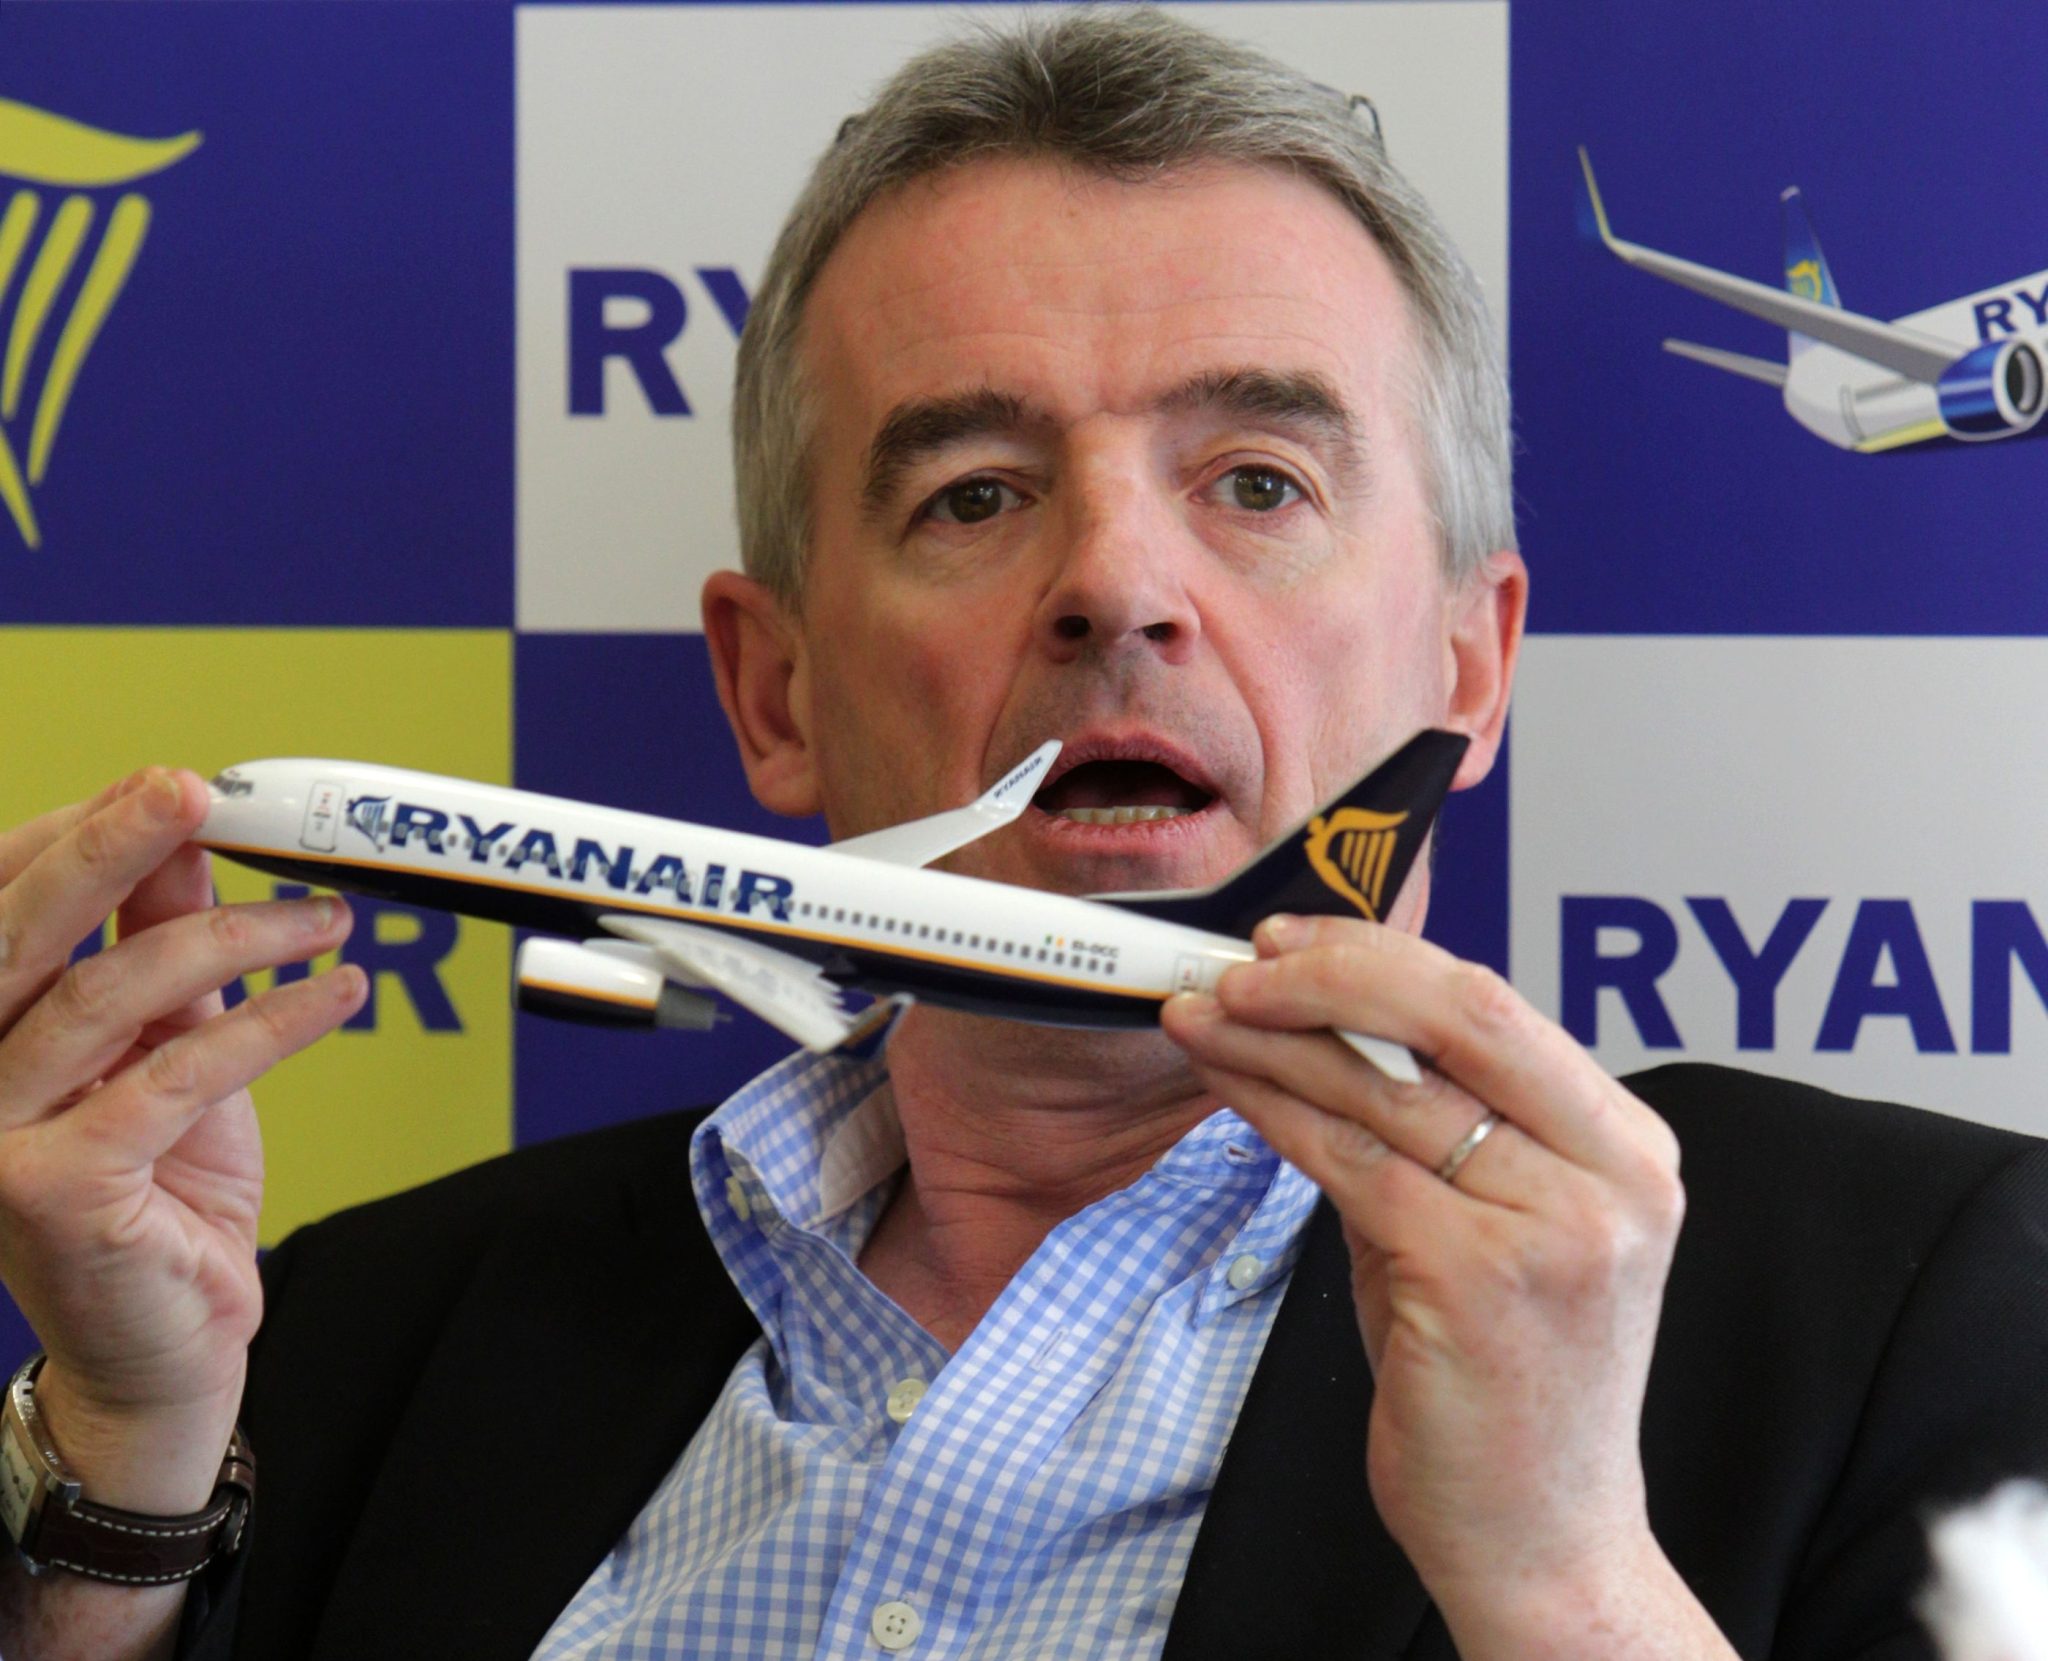 RyanAir CEO speaks out on 2 years of Boeing problems: ‘spanners under floor boards,’ ‘missing seat handles’ and ‘much needed’ new management